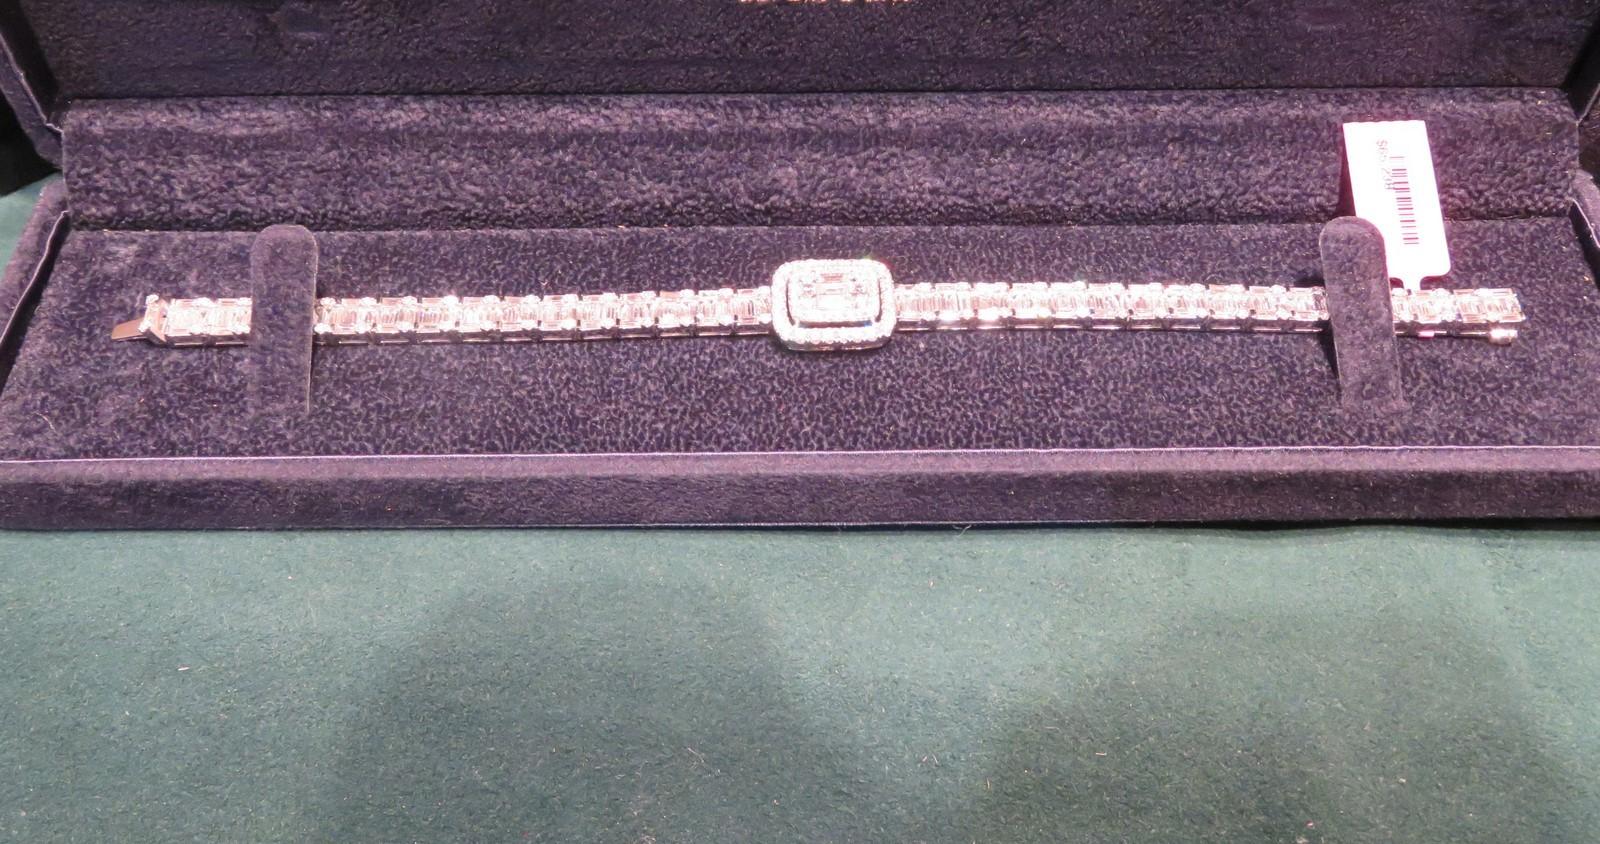 The Following Item we are offering is this Beautiful Rare Important 18KT Gold Sparkling Baguette Diamond Bracelet. This Rare Bracelet features an Array of Magnificent Rare Gorgeous Glittering Diamonds. T.C.W. Approx 7CTS!!
The Diamonds are of